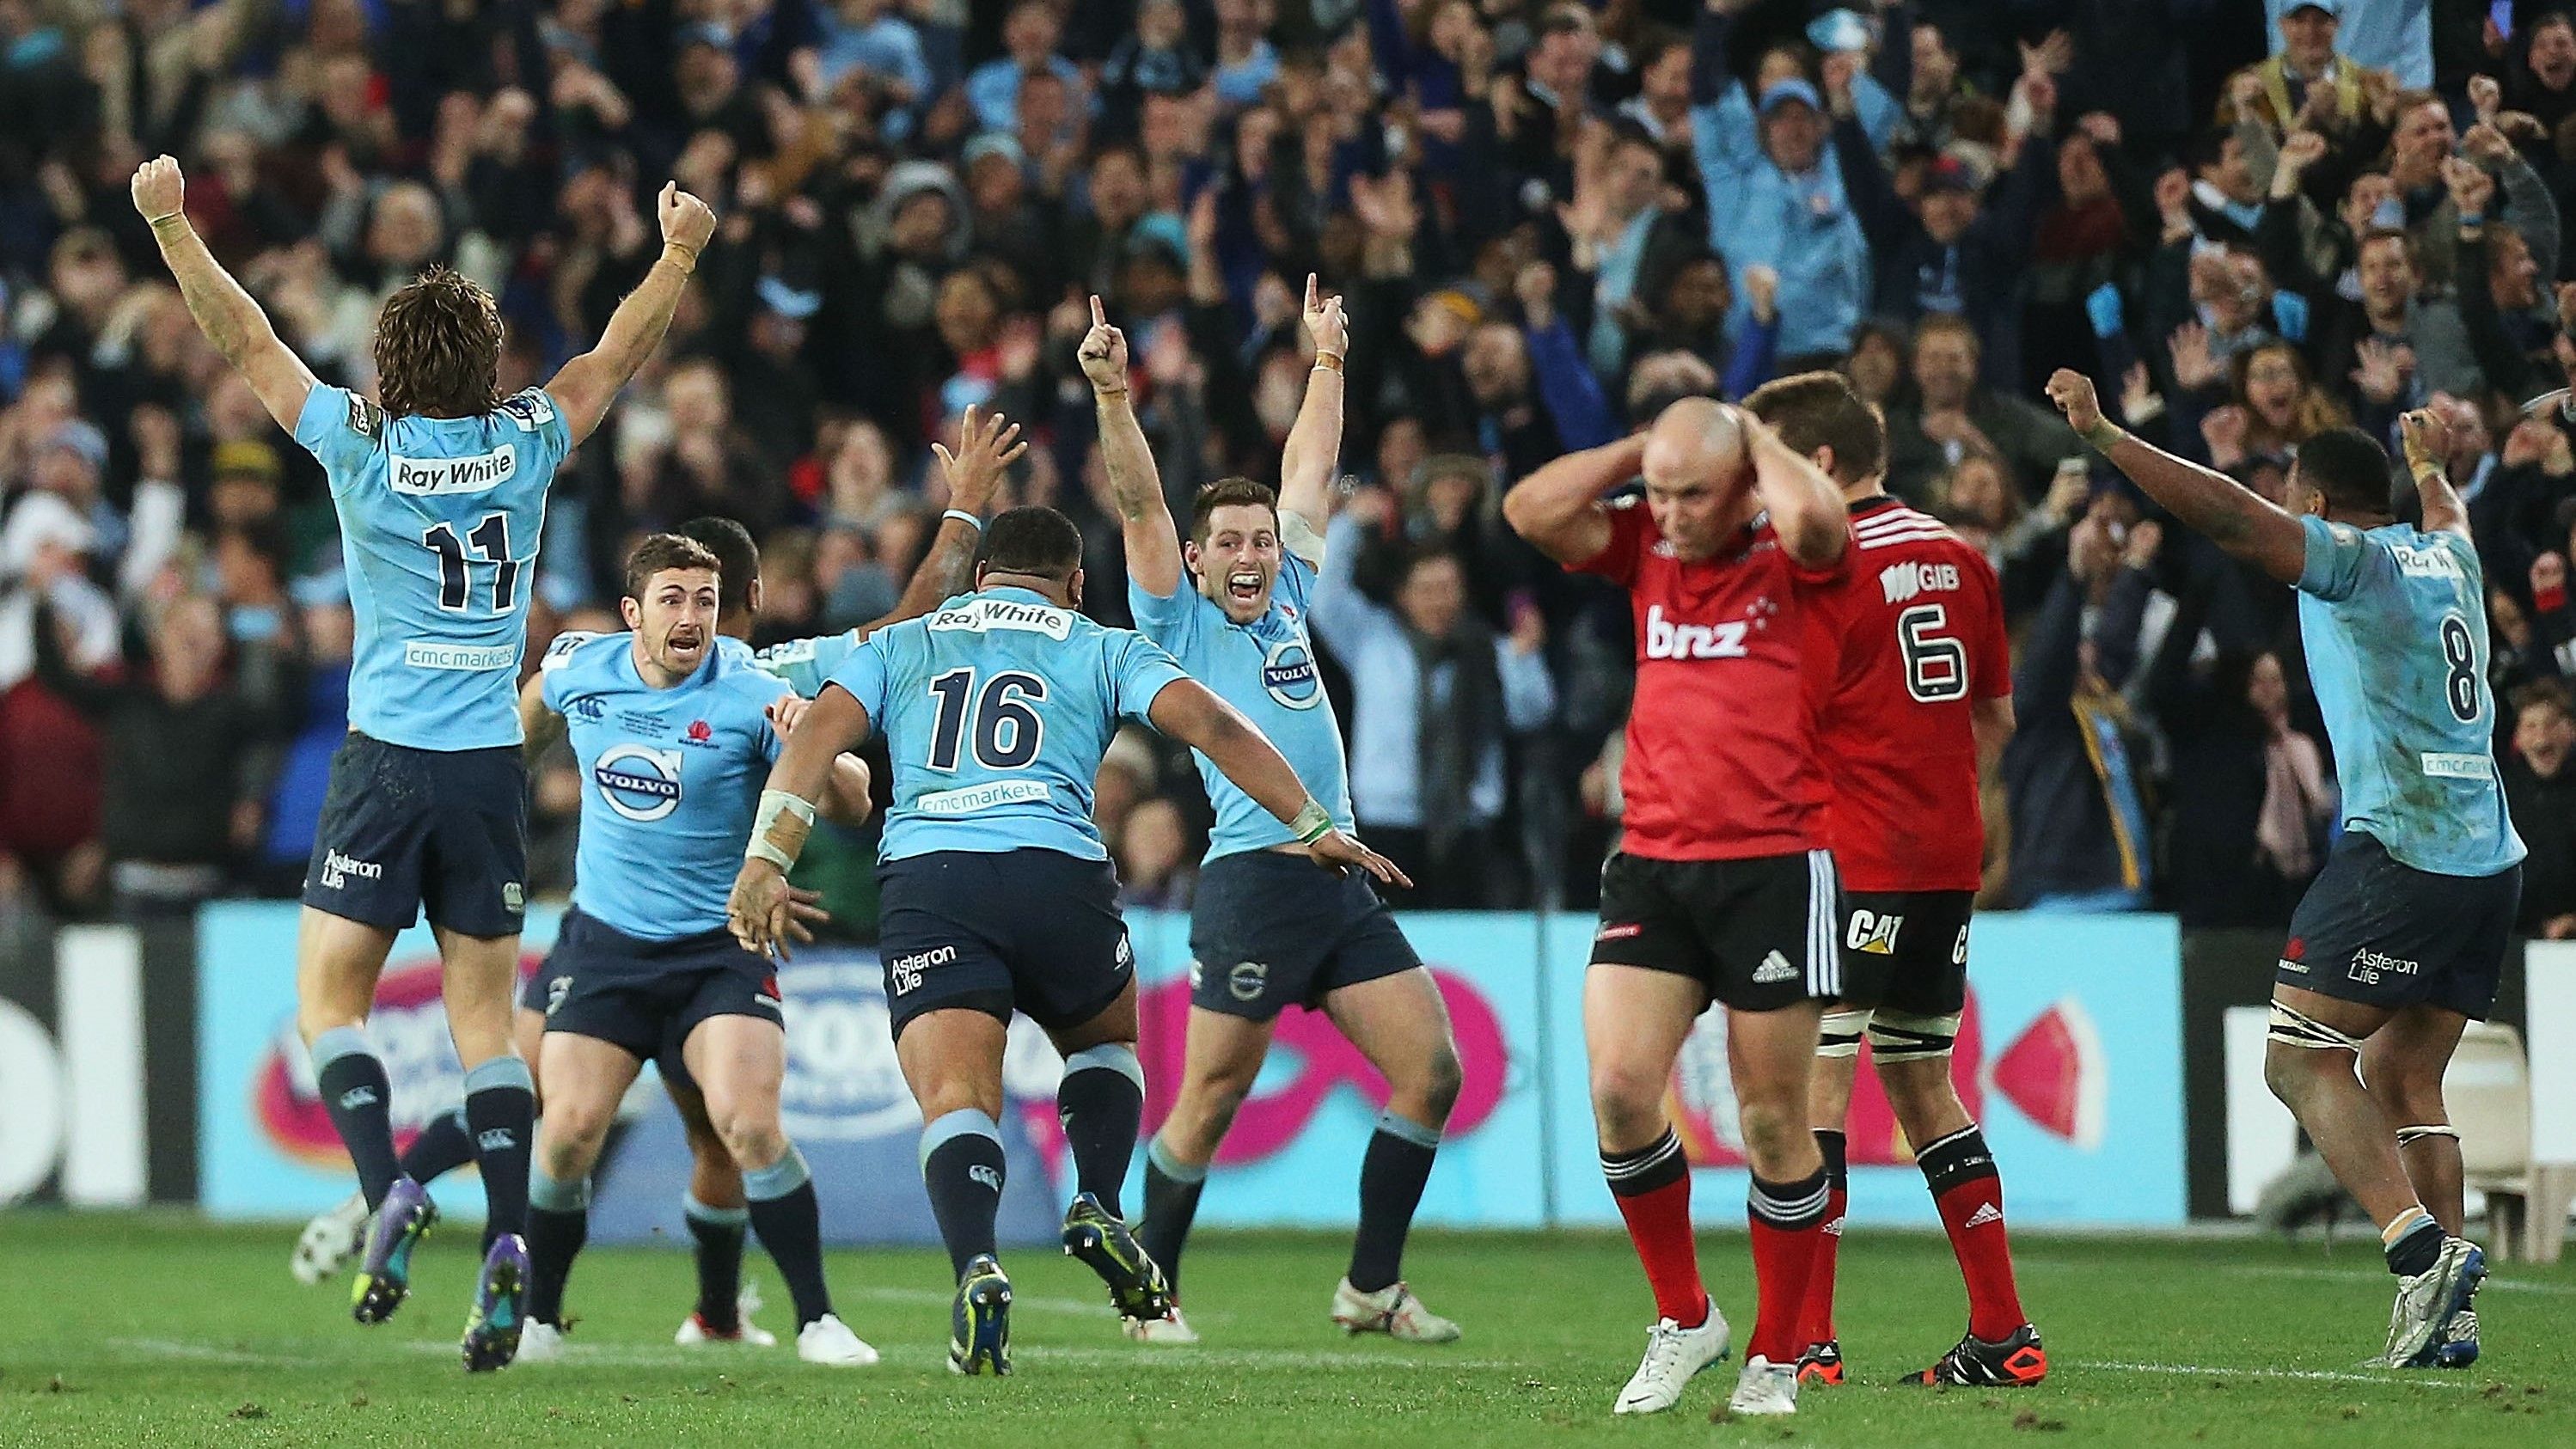 The Waratahs were the last Australian team to win a Super Rugby title, outside of the COVID-19 pandemic, in 2014.